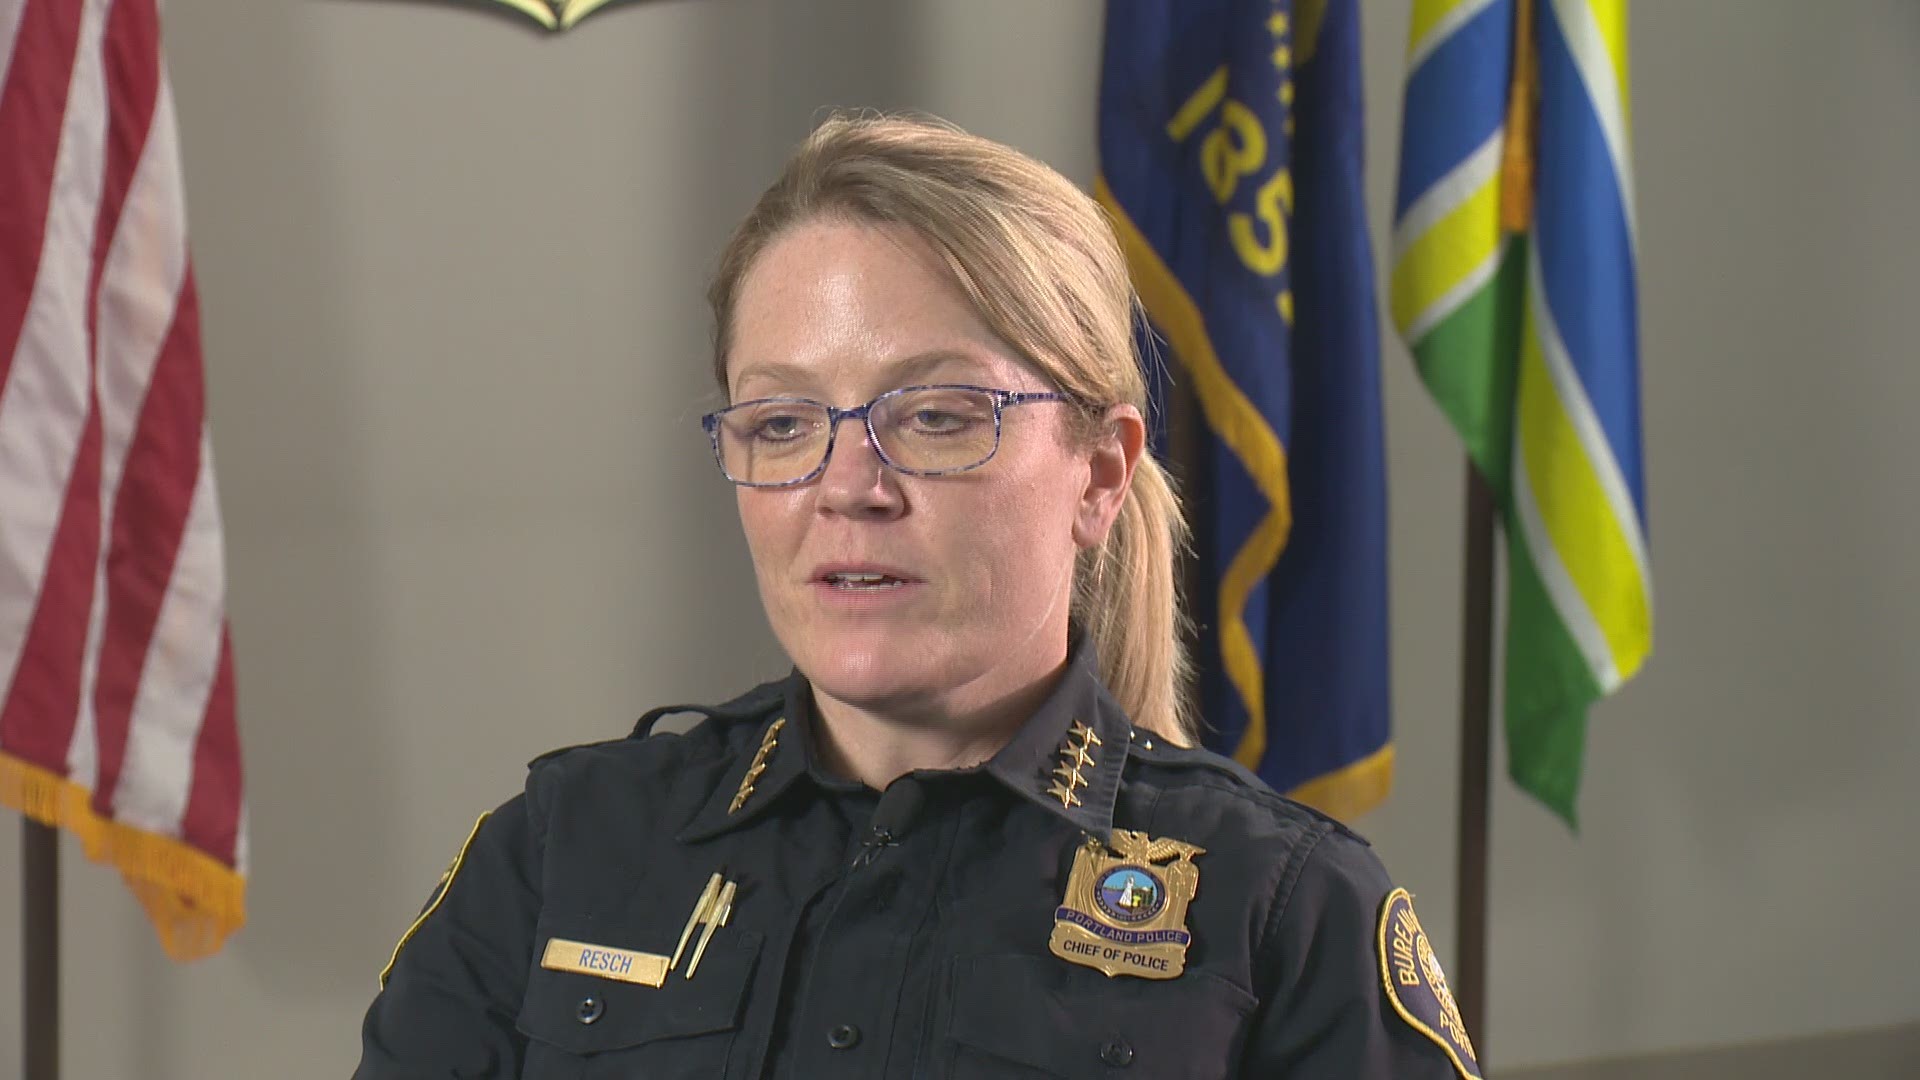 New Portland Police Chief Jami Resch discusses the challenges officers face when dealing with someone in a mental health crisis and where resources fall short.